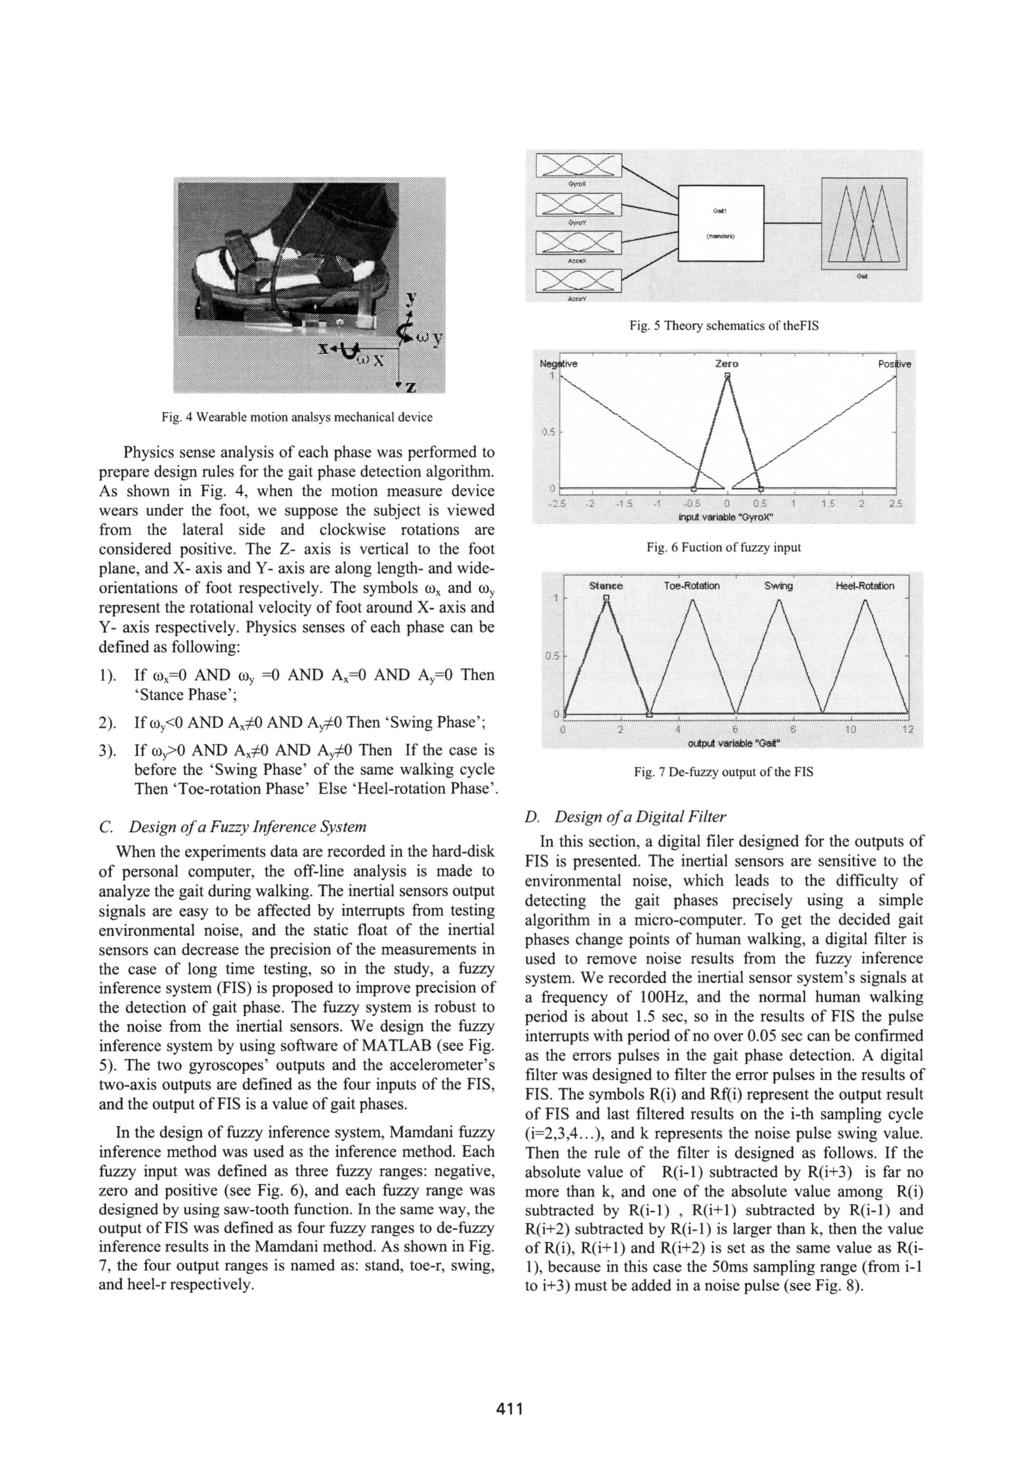 .- s i. Fig. 5 Theory schematics of thefis Fig. 4 Wearable motion analsys mechanical device Physics sense analysis of each phase was performed to design rules for the gait phase detection algorithm.